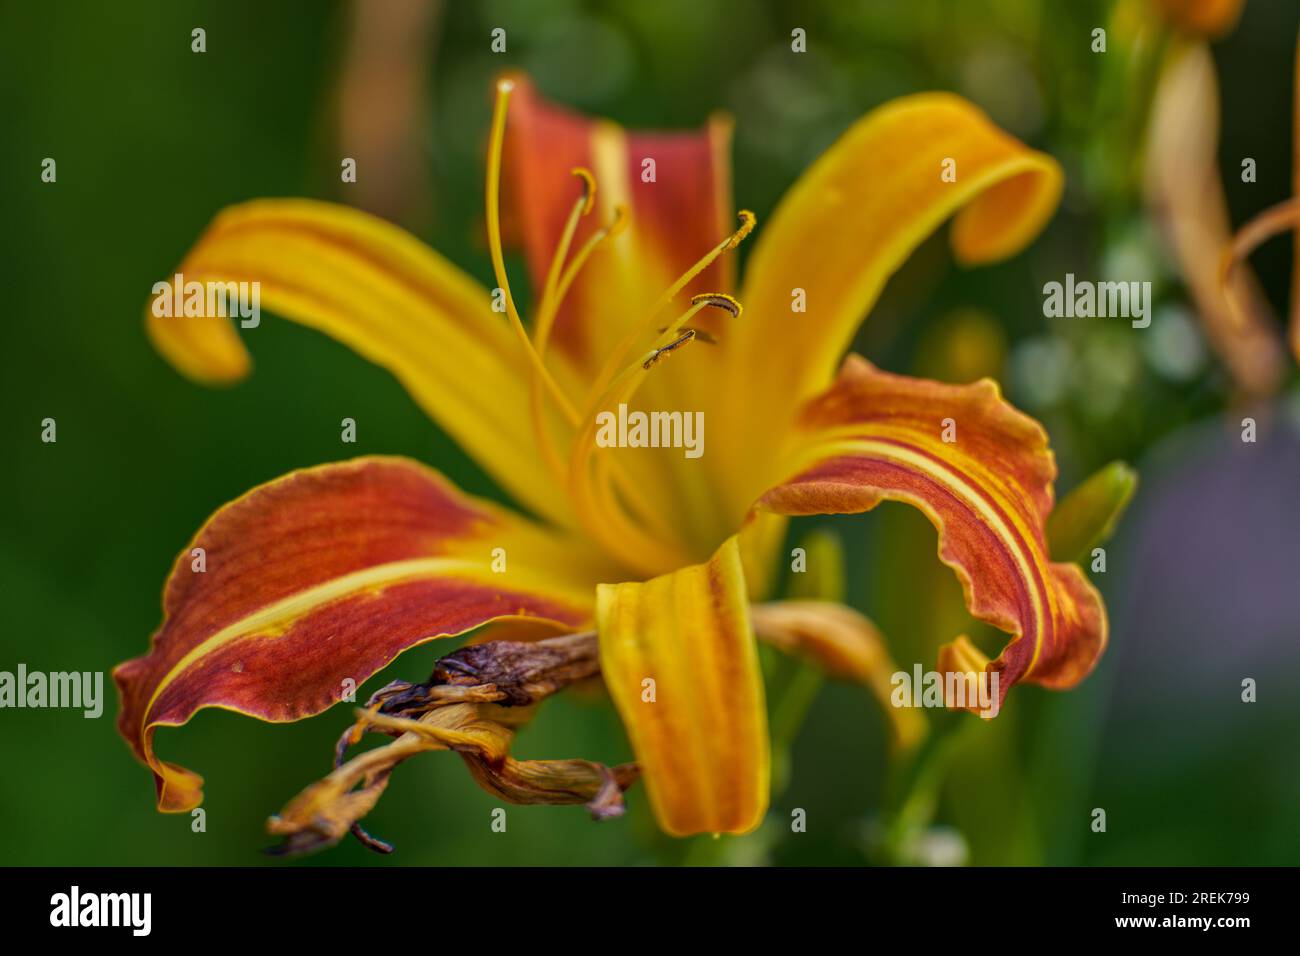 Lush,colorful vivid yellow red  day lily flower close up Stock Photo